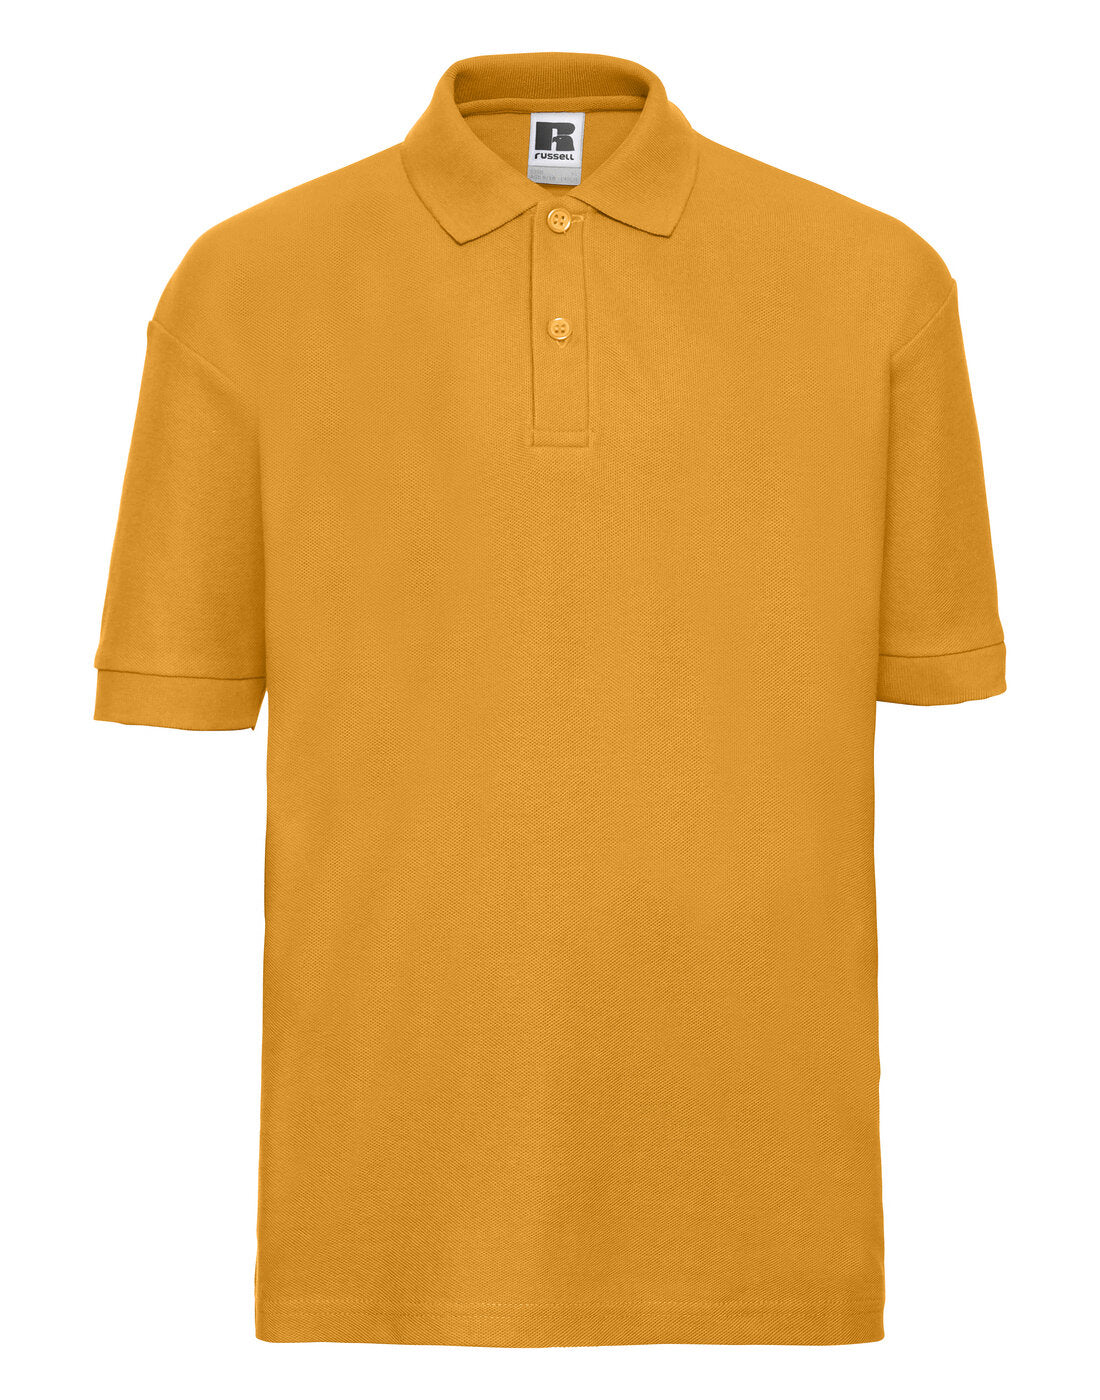 Russell Kids Classic Polycotton Polo Pure Gold